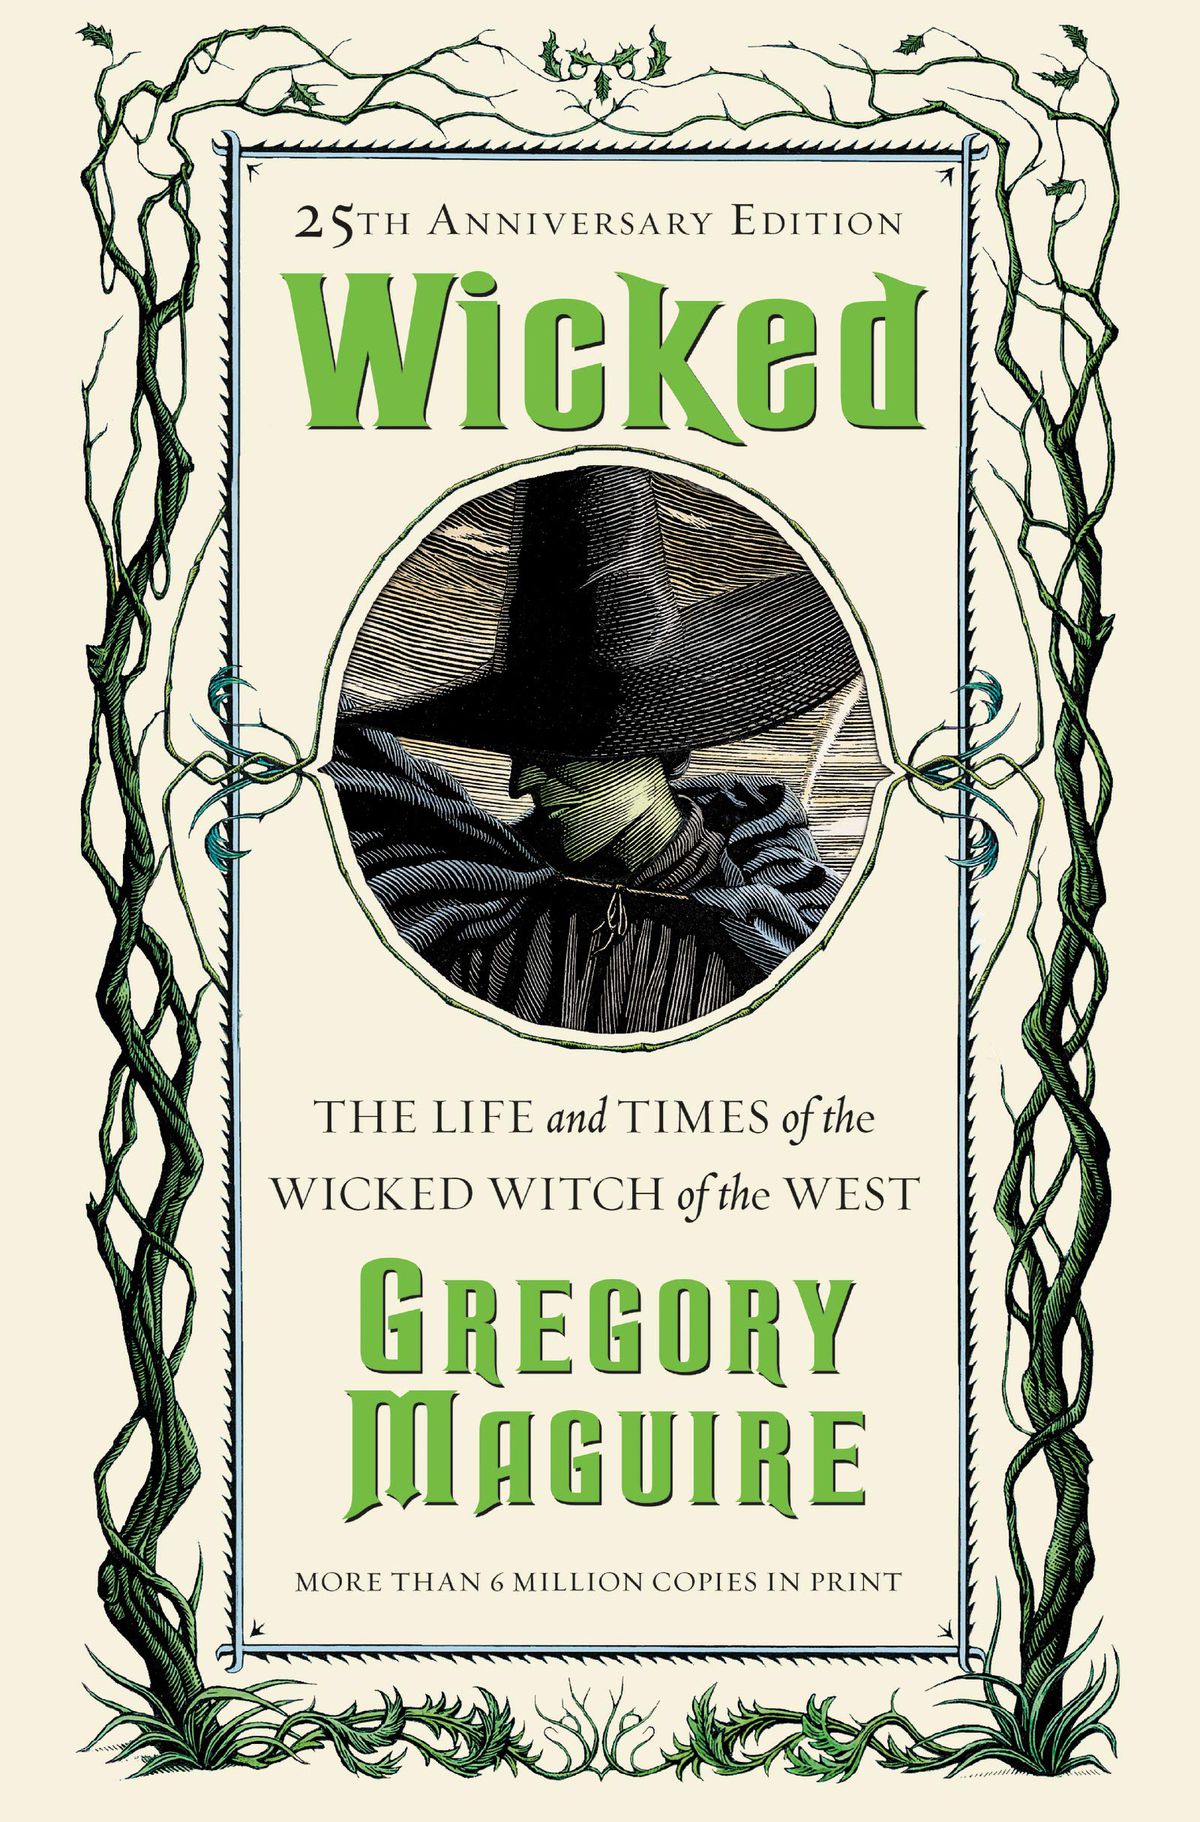 The 25th anniversary cover of Gregory Maguire’s novel Wicked